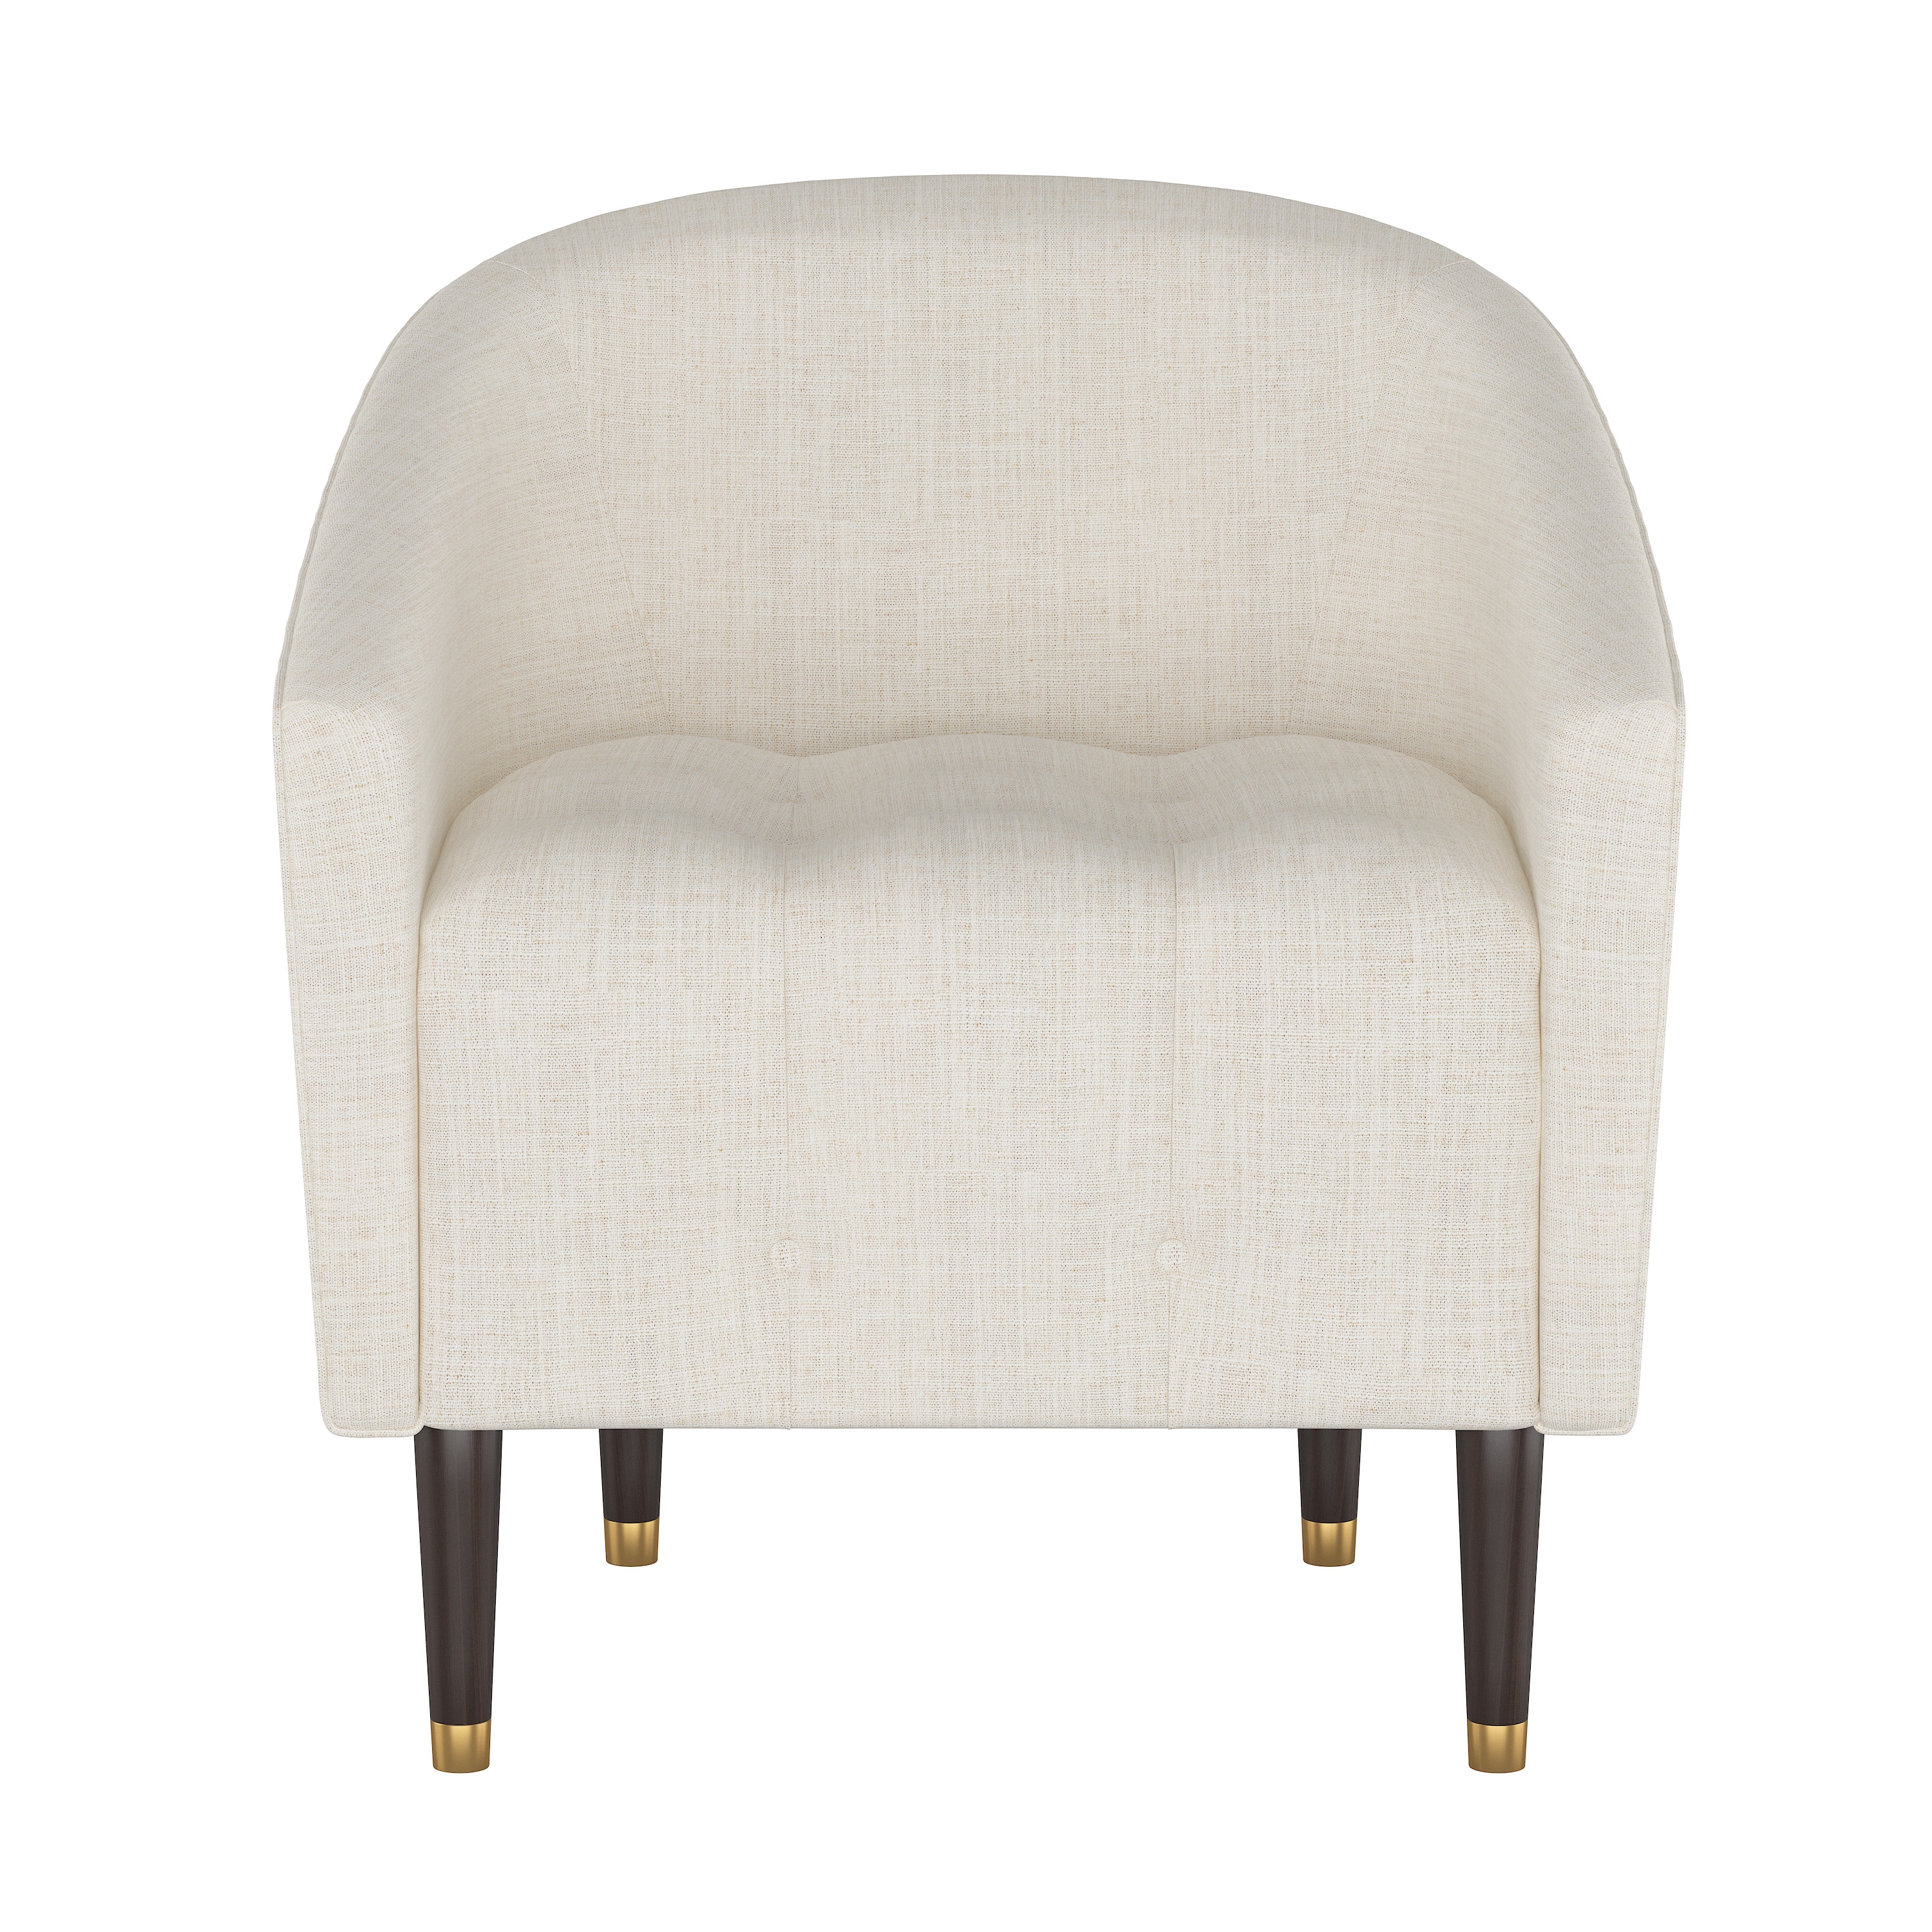 Irving Park Chair in Linen Talc - Image 1